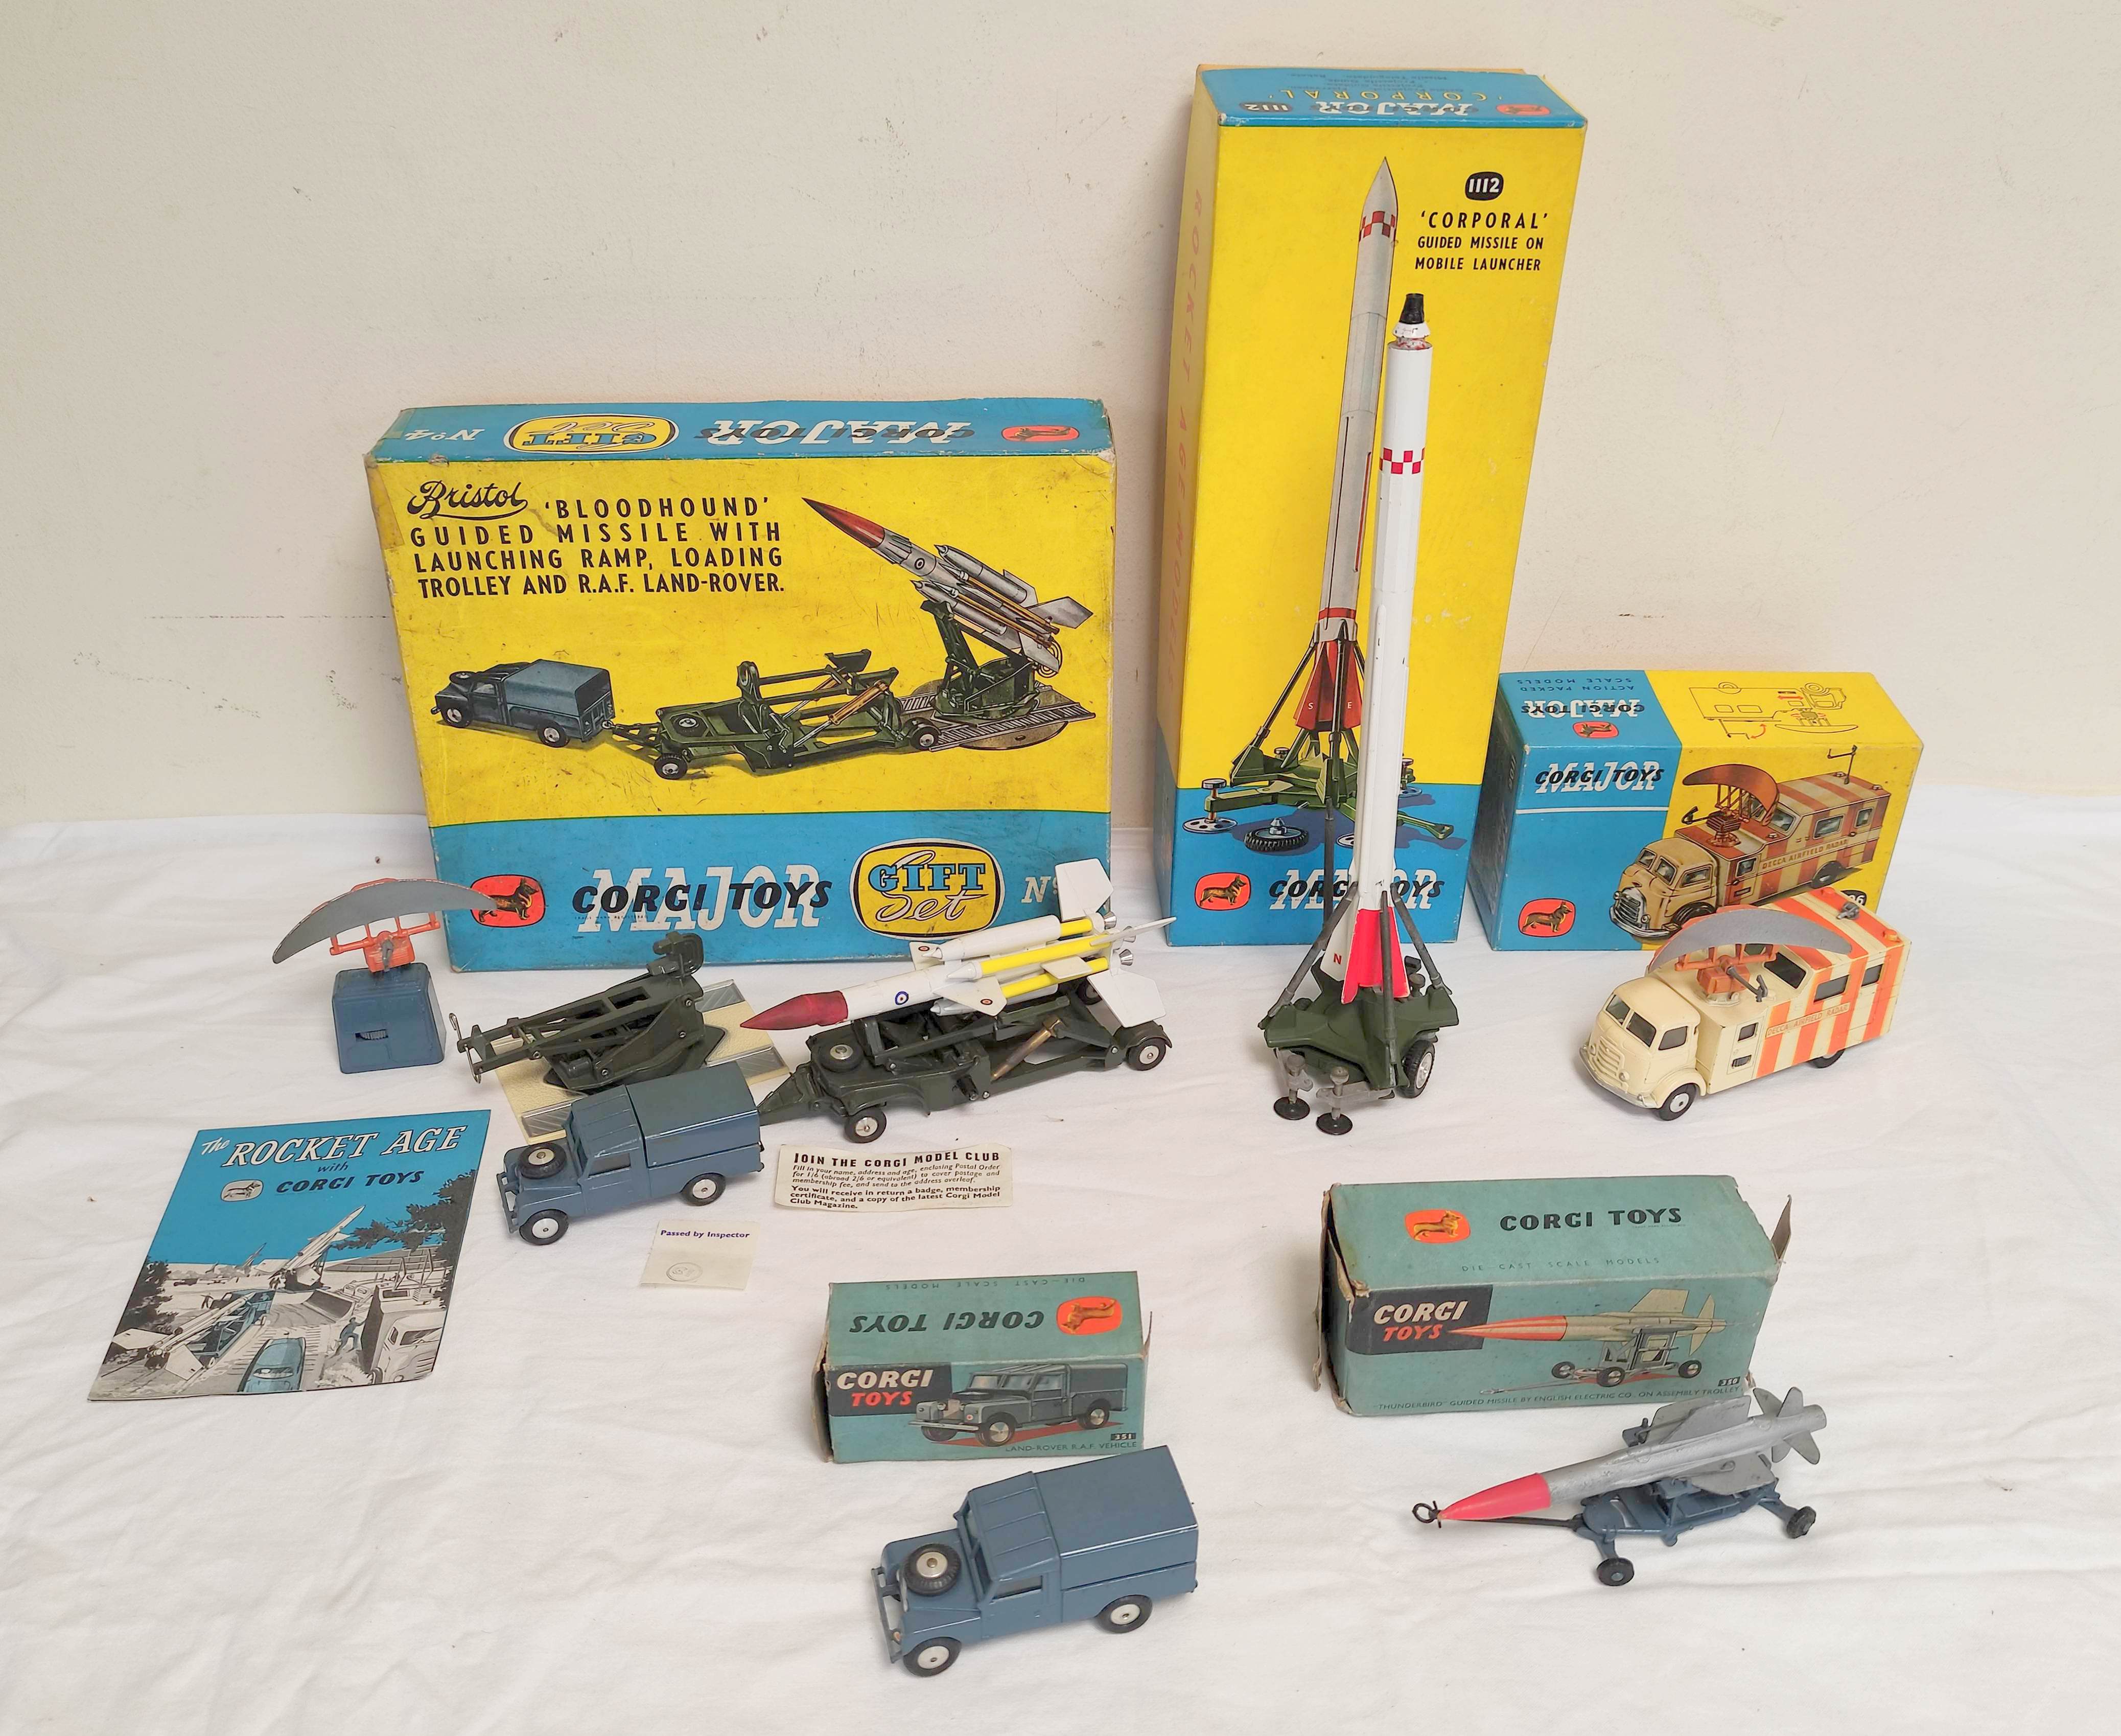 Corgi. Rocket Age Gift Sets to include No 4 Bristol Bloodhound Guided Missile With Launching Ramp,